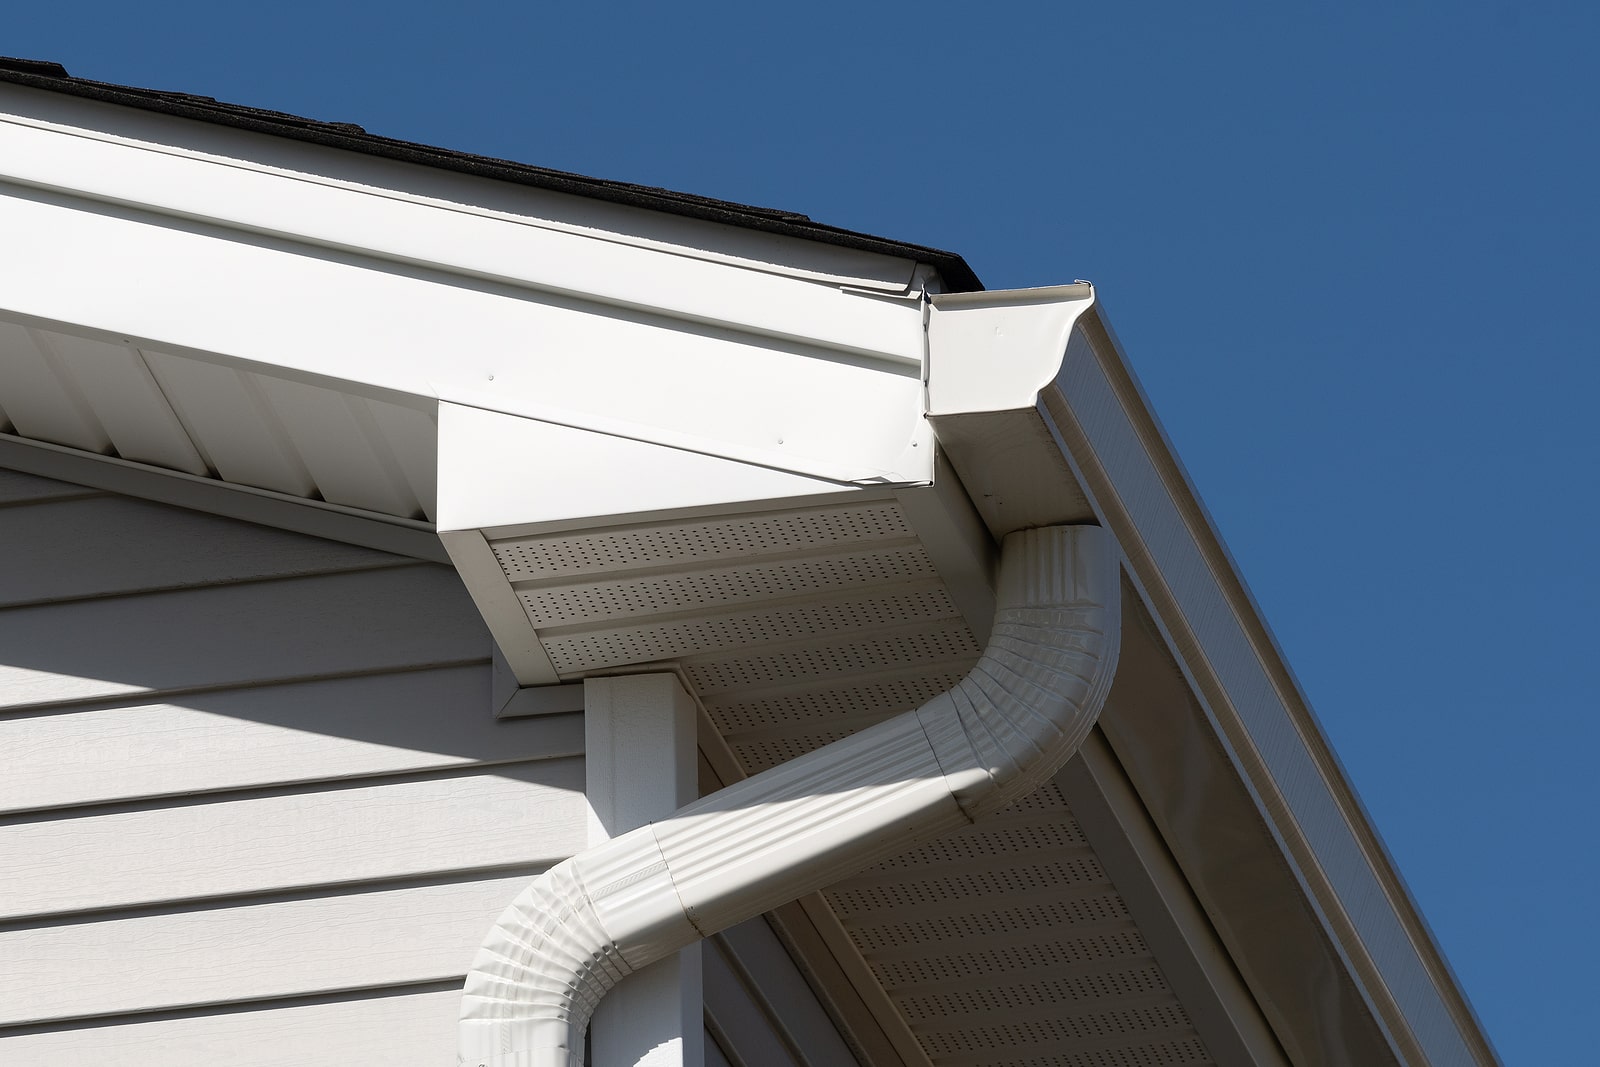 Siding and Gutter Replacement in Covington, GA